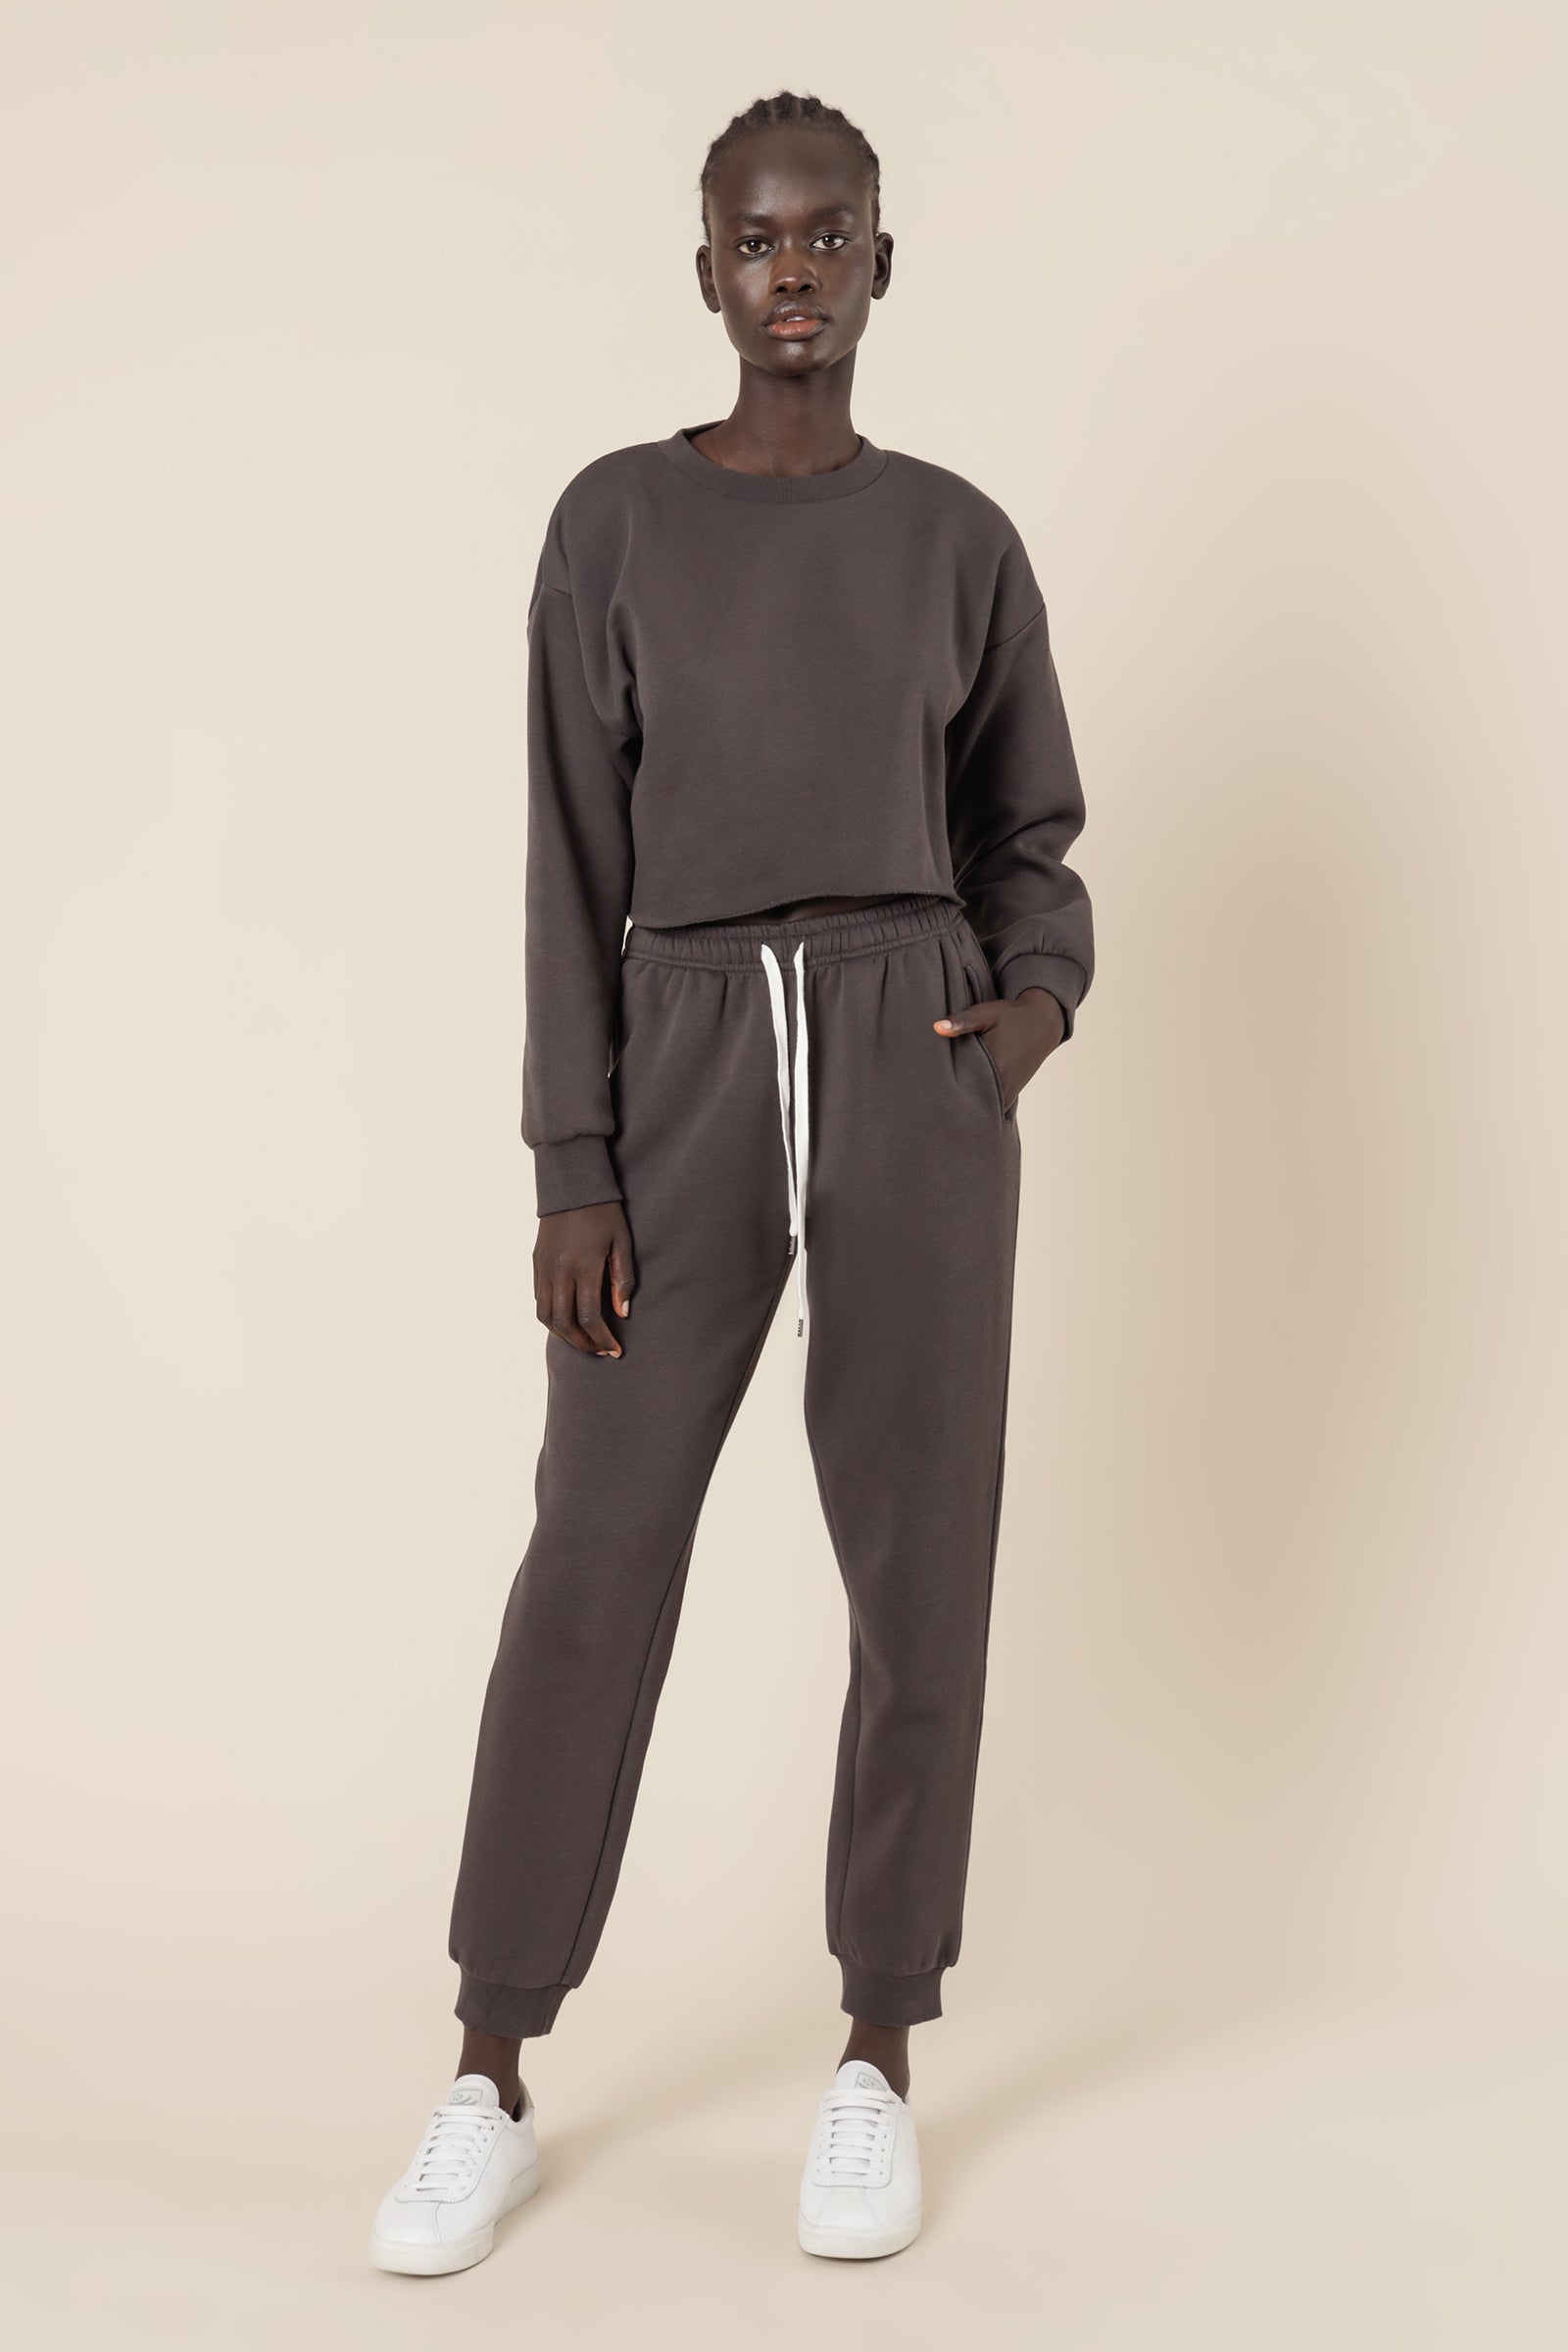 Nude Lucy Carter Classic Trackpant Coal Pants 